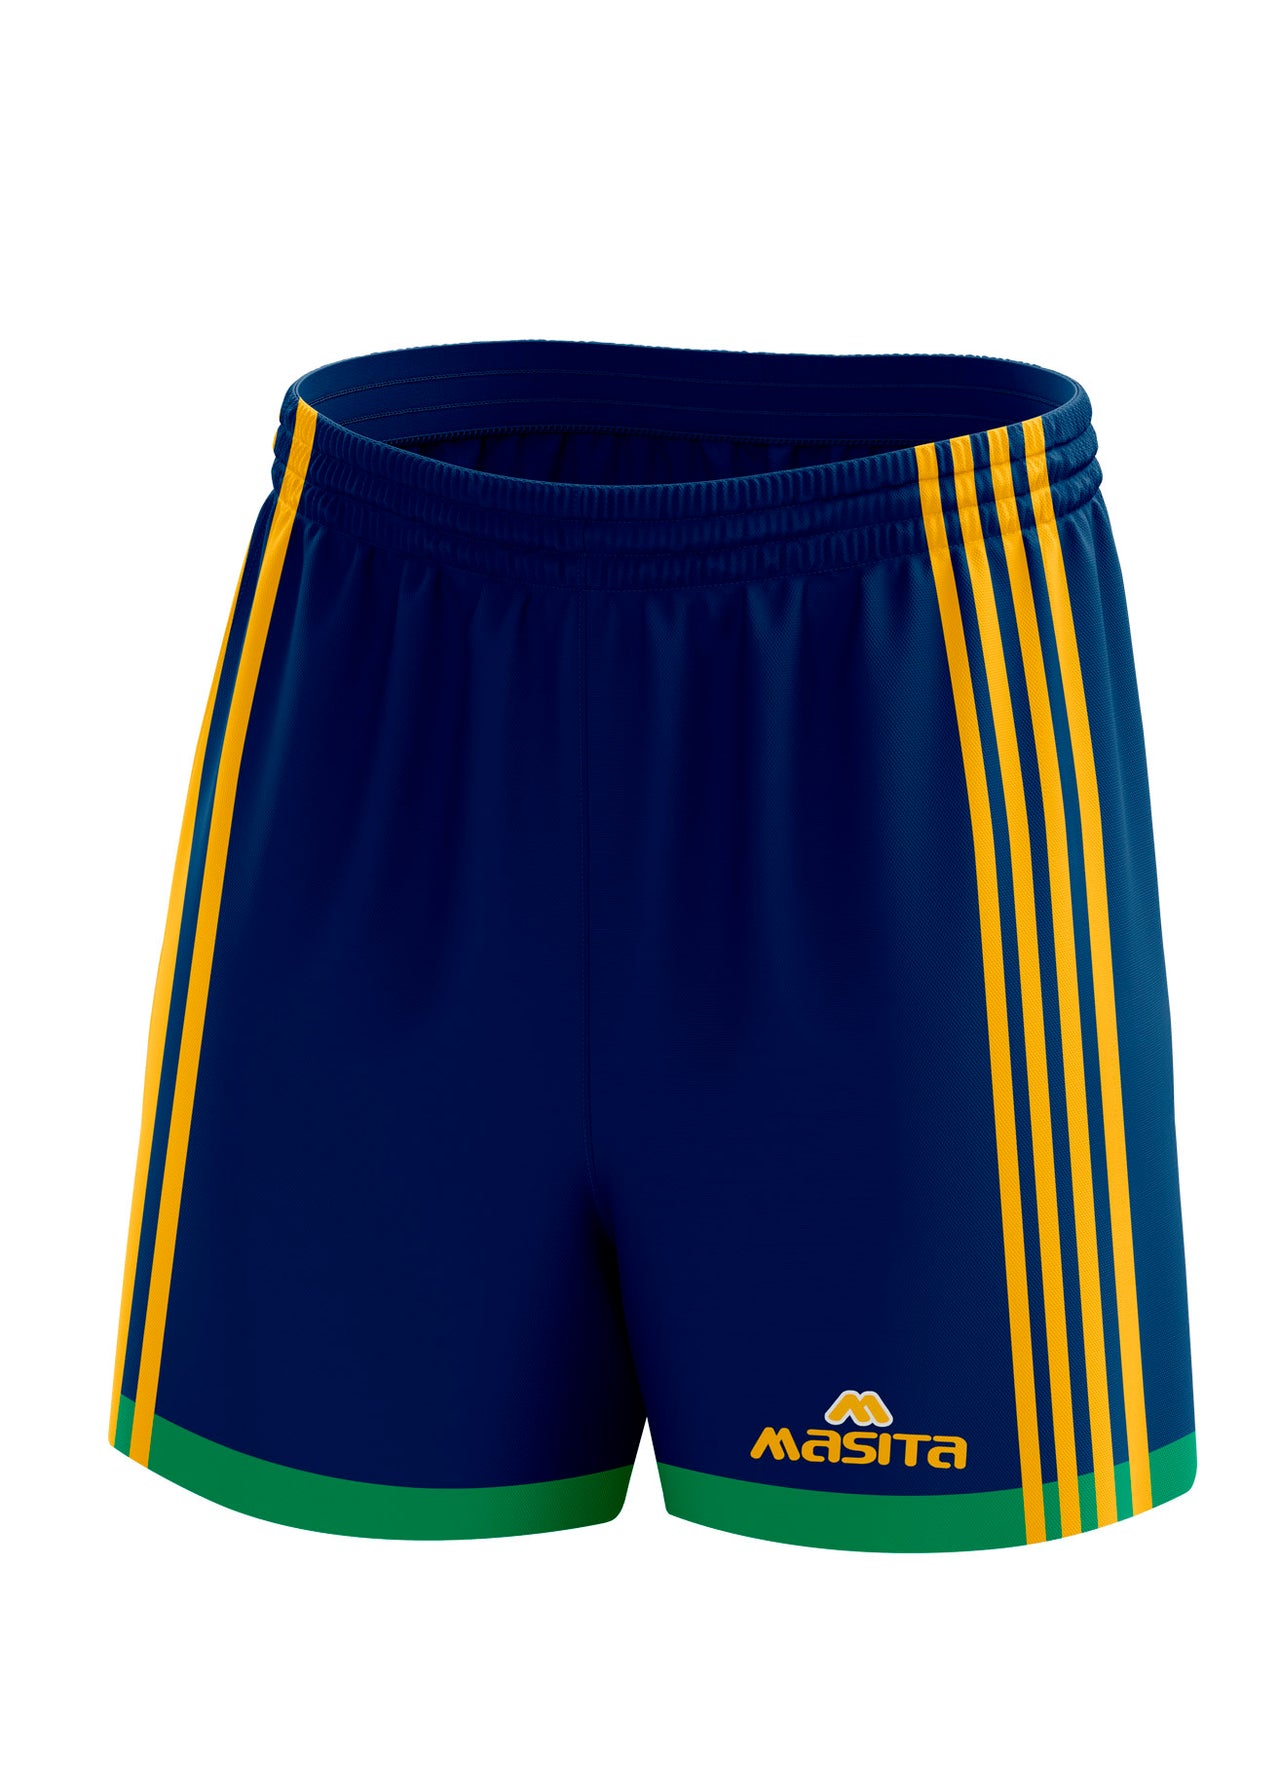 Solo Gaelic Shorts Navy/Green/Amber Adult